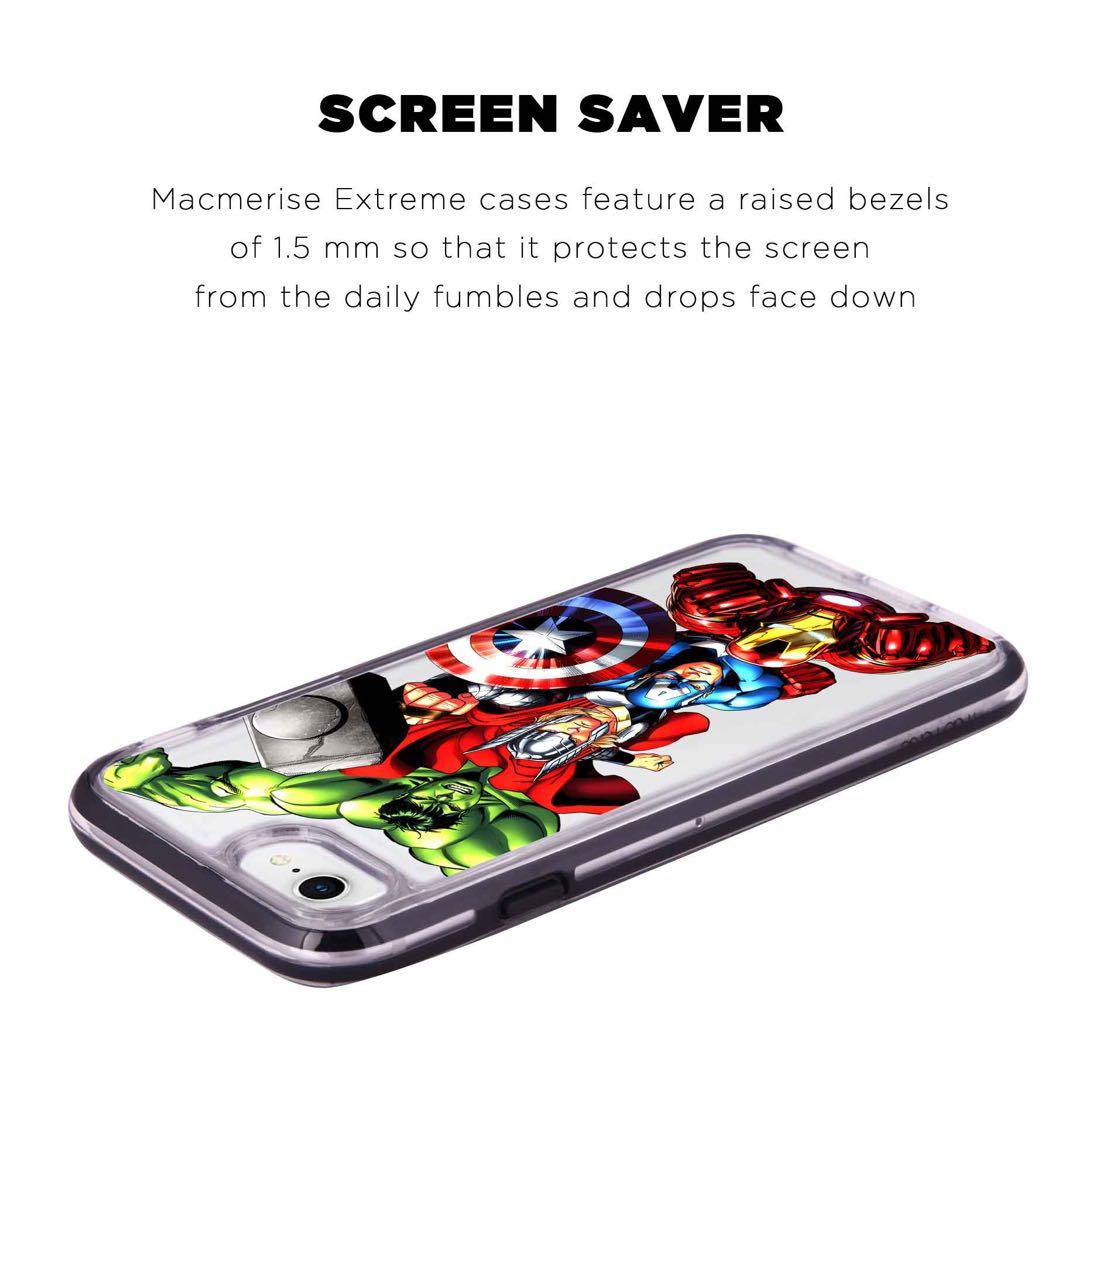 Avengers Fury - Extreme Phone Case for iPhone 8